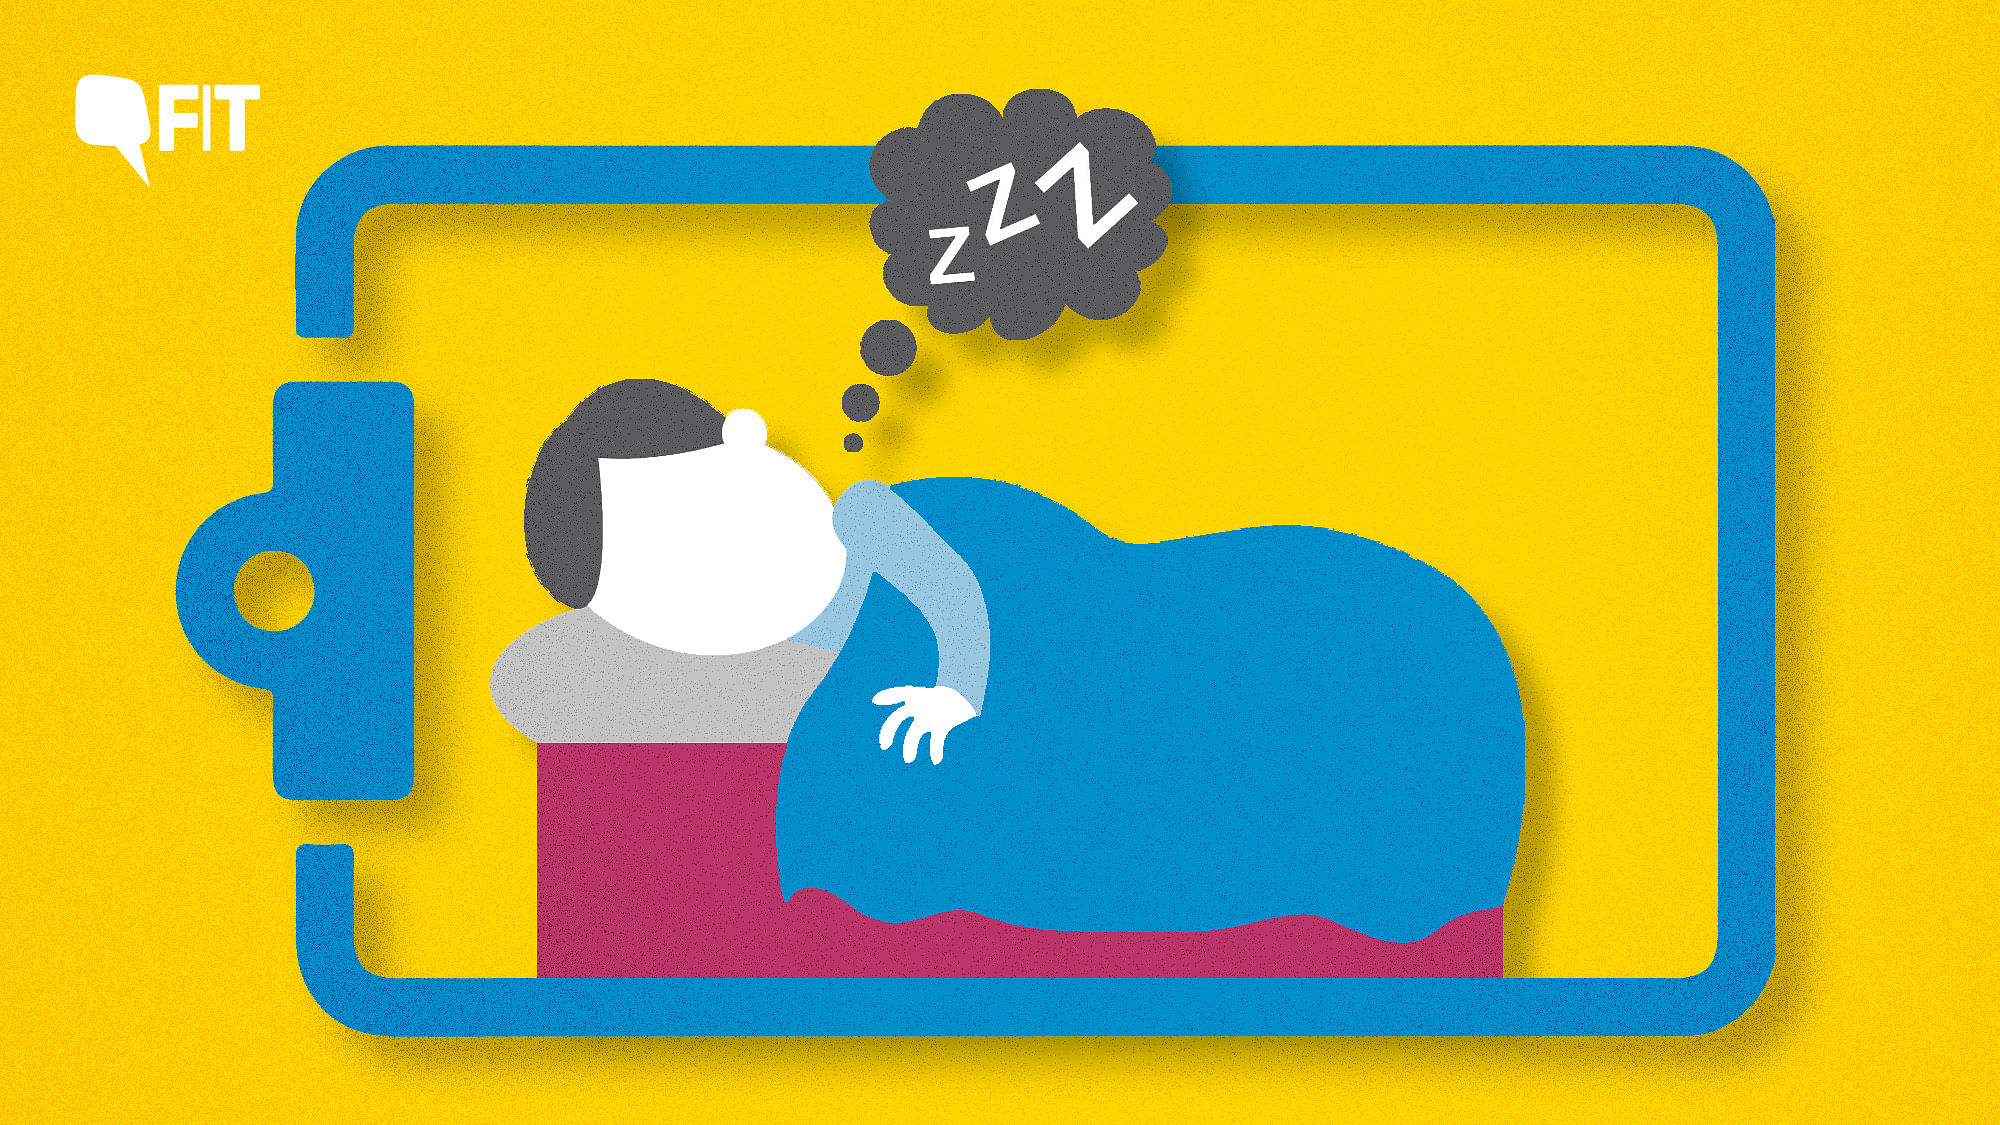 World Sleep Day 2019 is on 15 March.